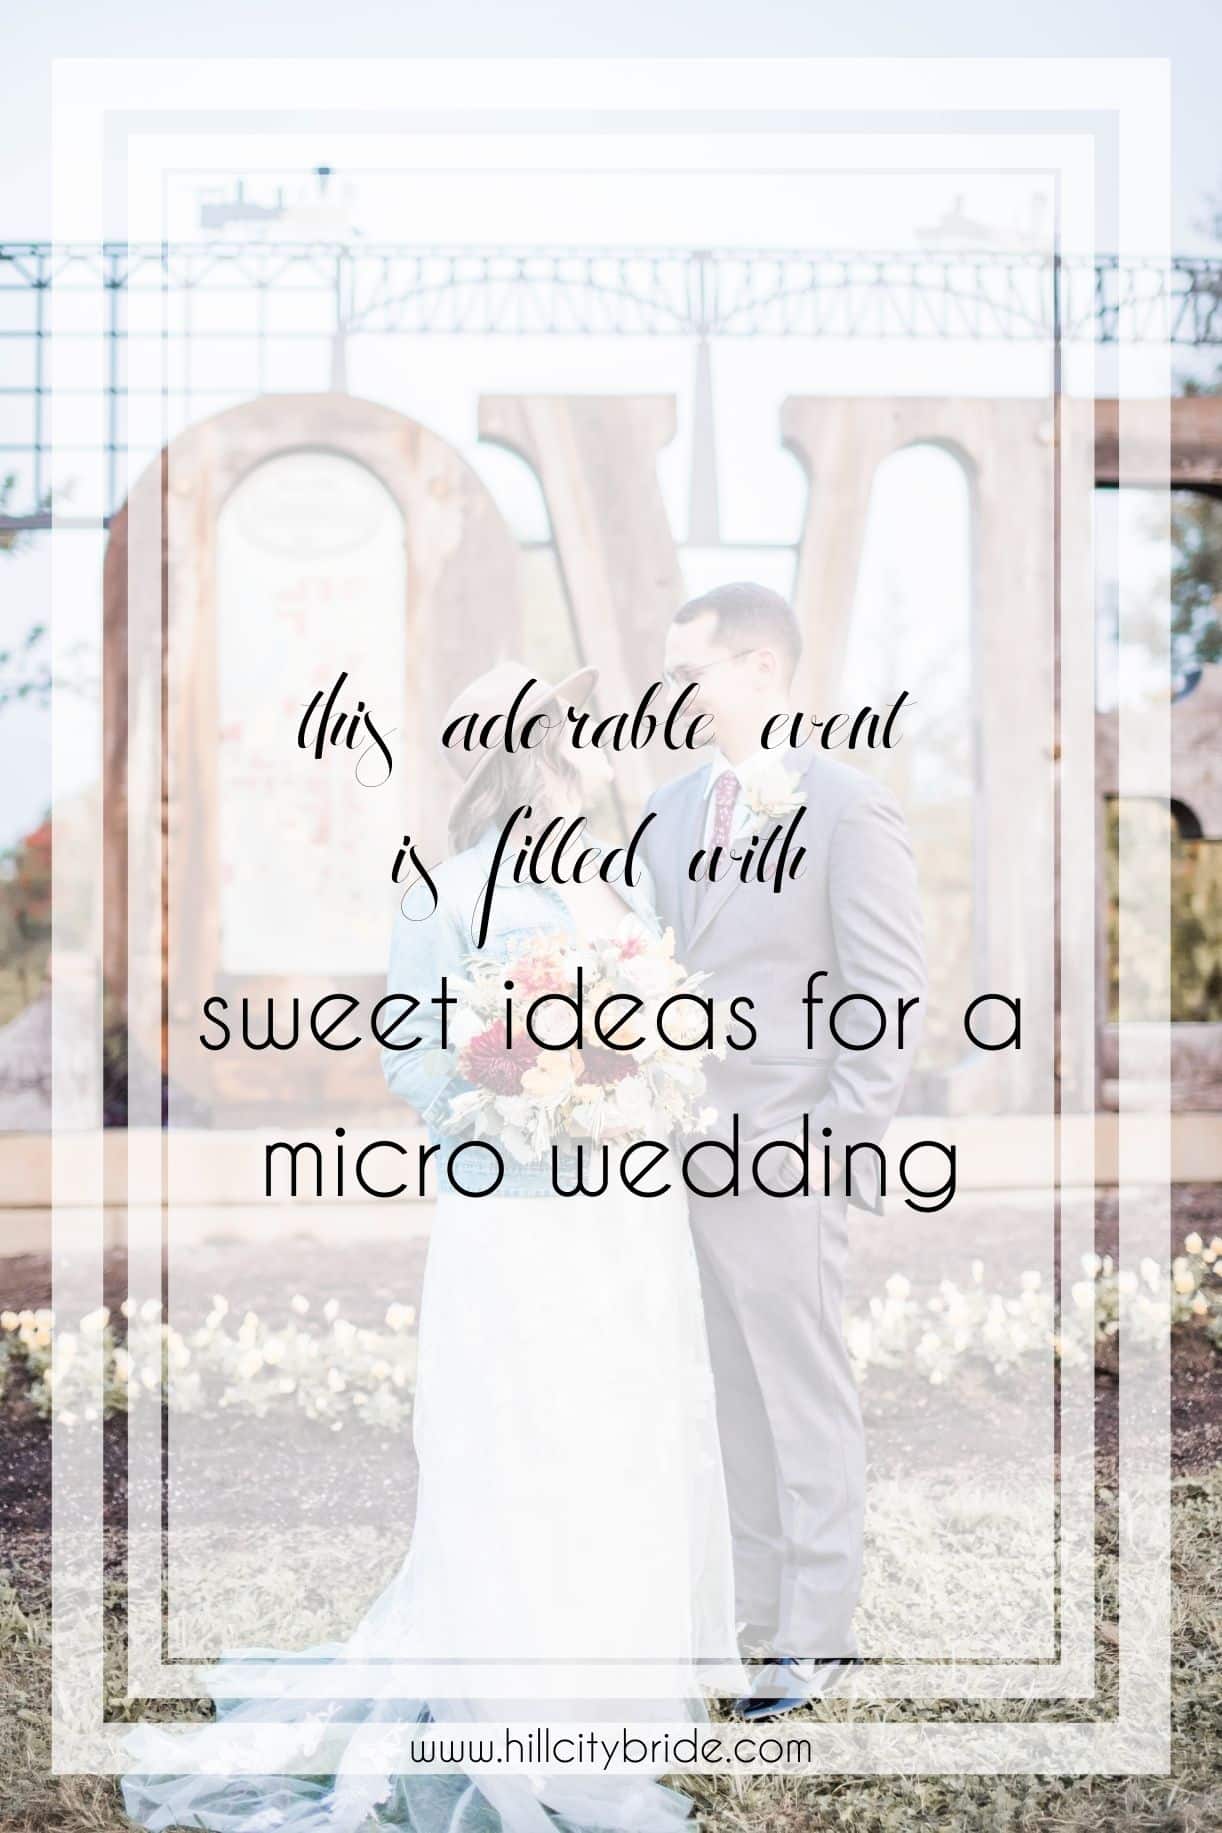 This Adorable Event Is Filled With Sweet Ideas for a Micro Wedding